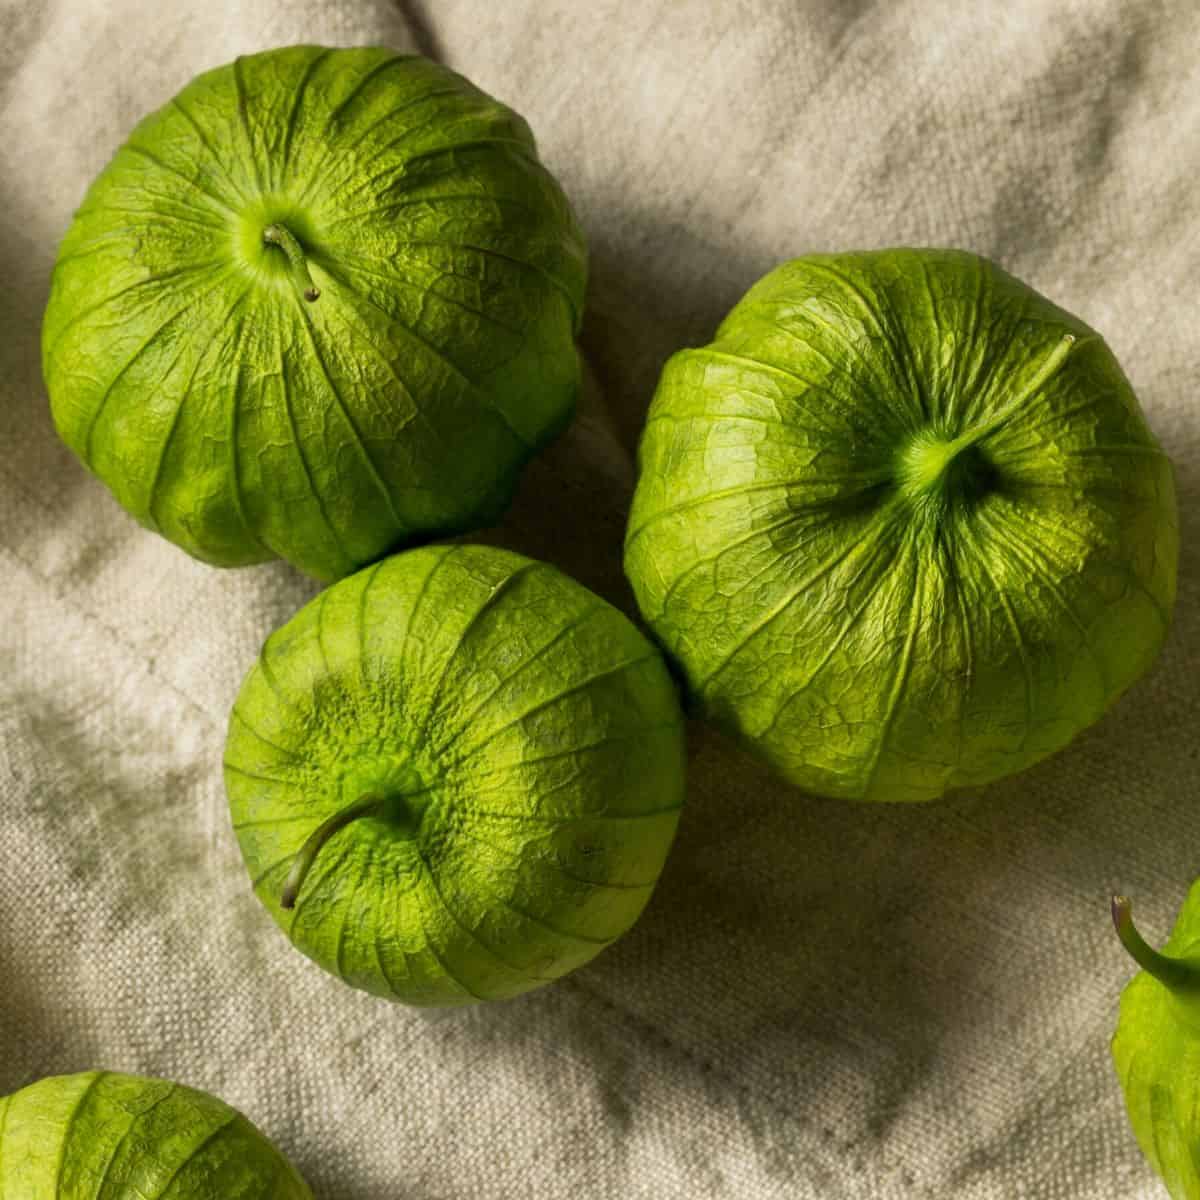 What Are Tomatillos? Here’s What You Need to Know